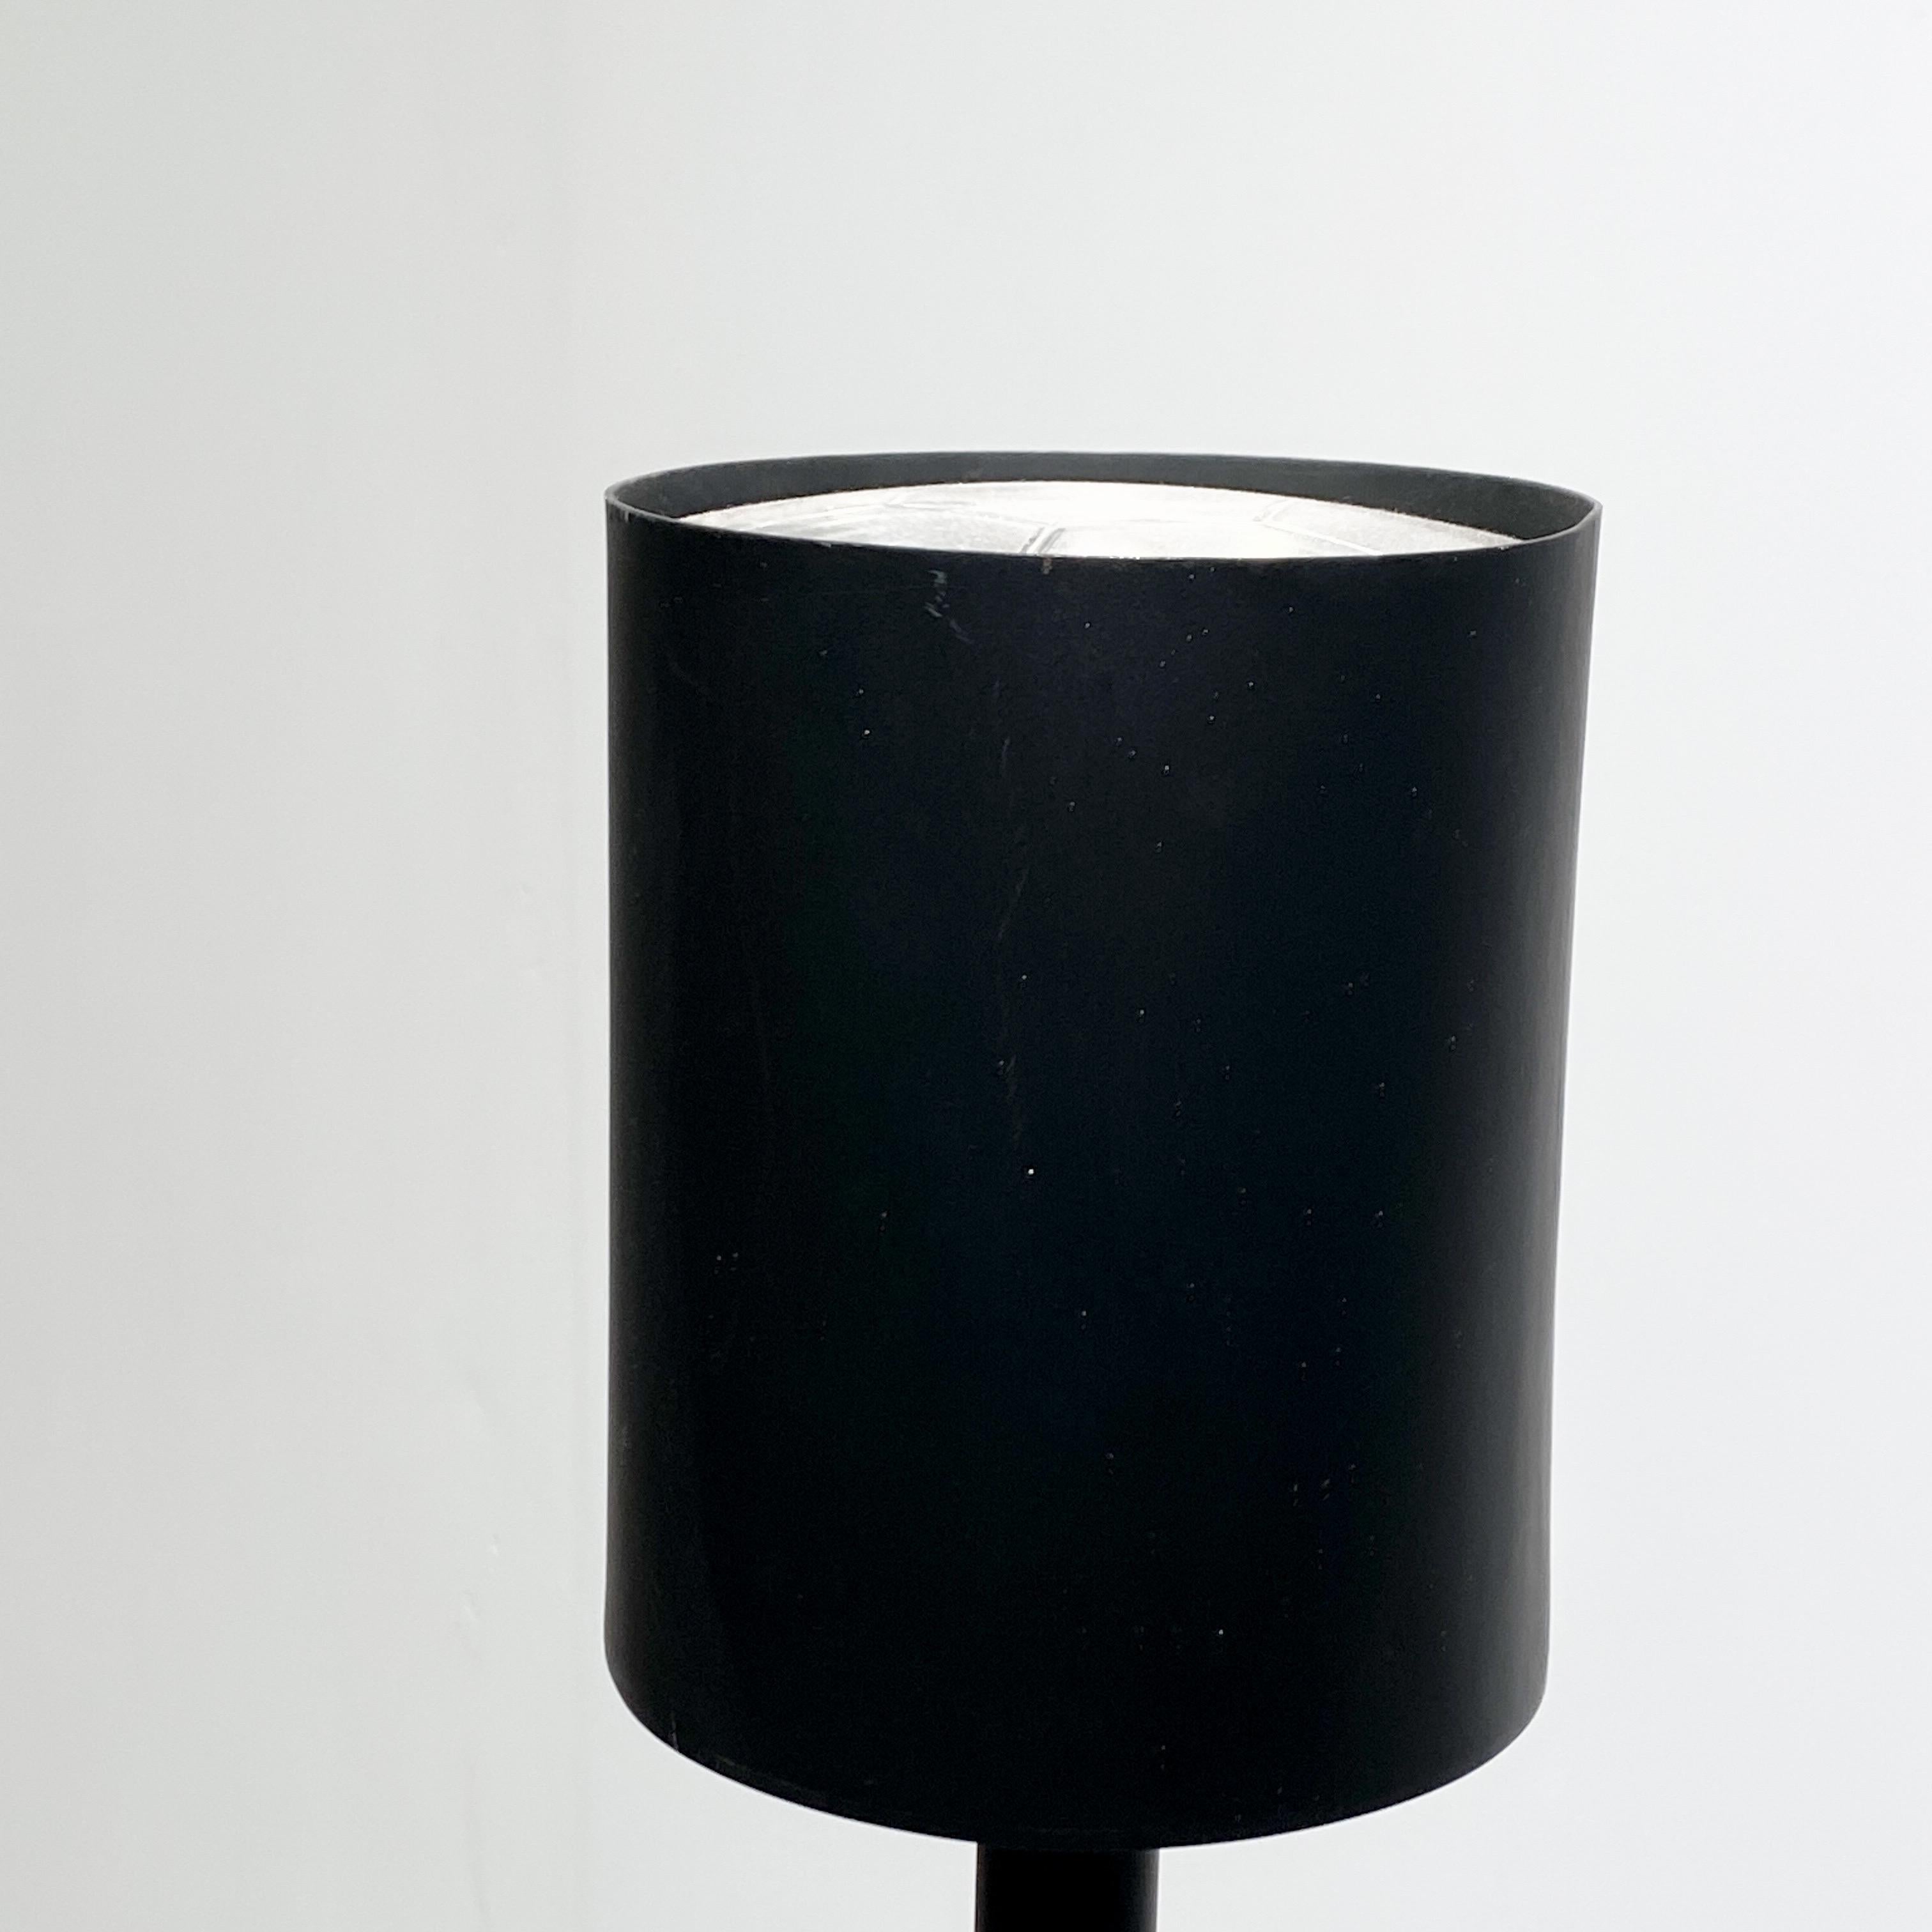 Lacquered Wim den Boon, black one-off floorlamp icw Gispen, midcentury modern design 1950s For Sale